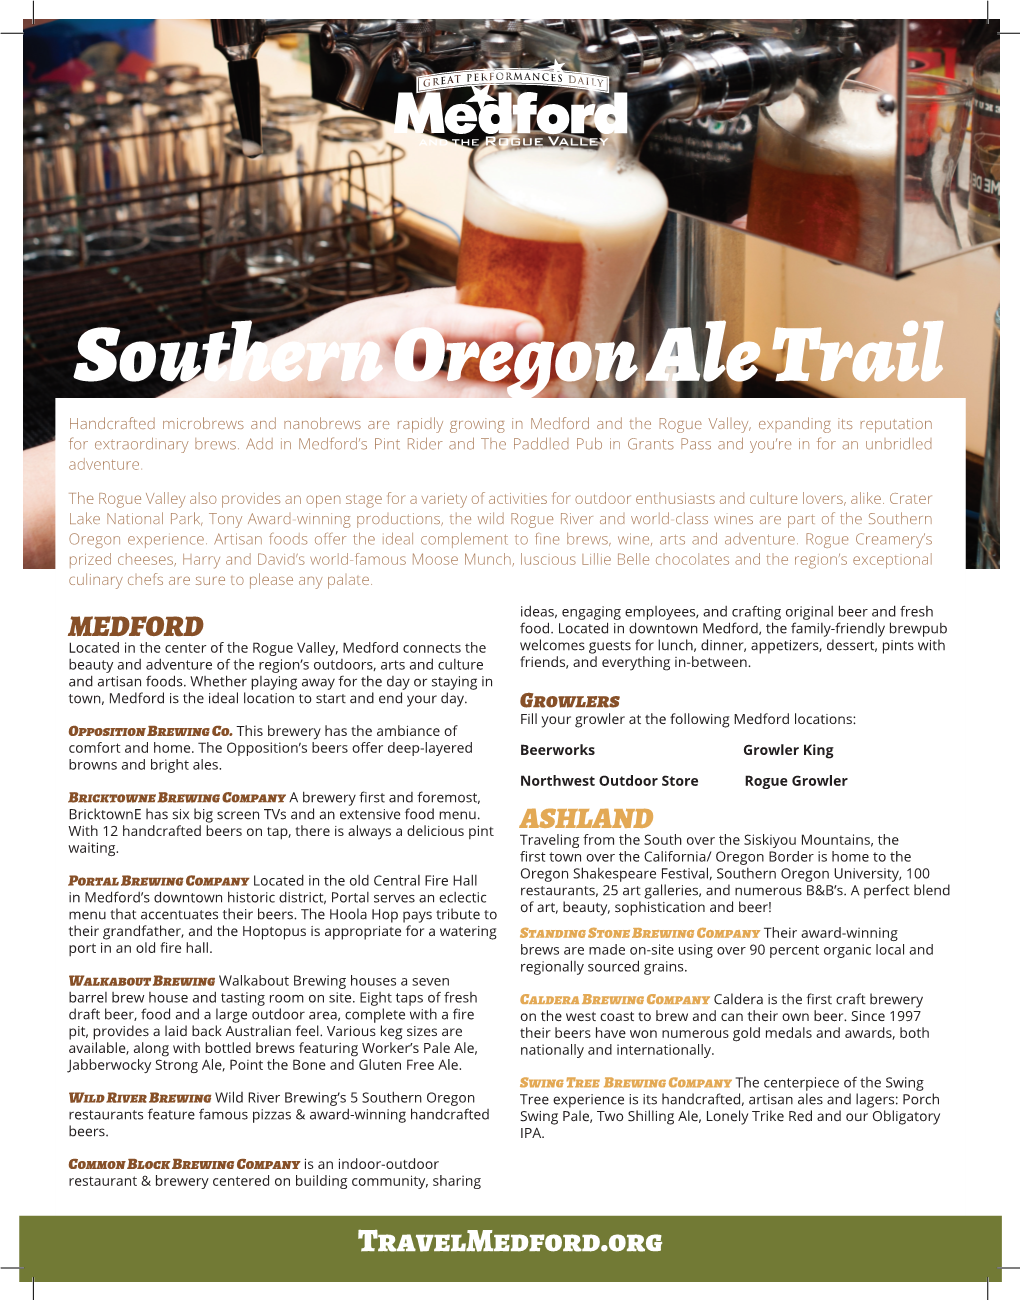 Southern Oregon Ale Trail Handcrafted Microbrews and Nanobrews Are Rapidly Growing in Medford and the Rogue Valley, Expanding Its Reputation for Extraordinary Brews